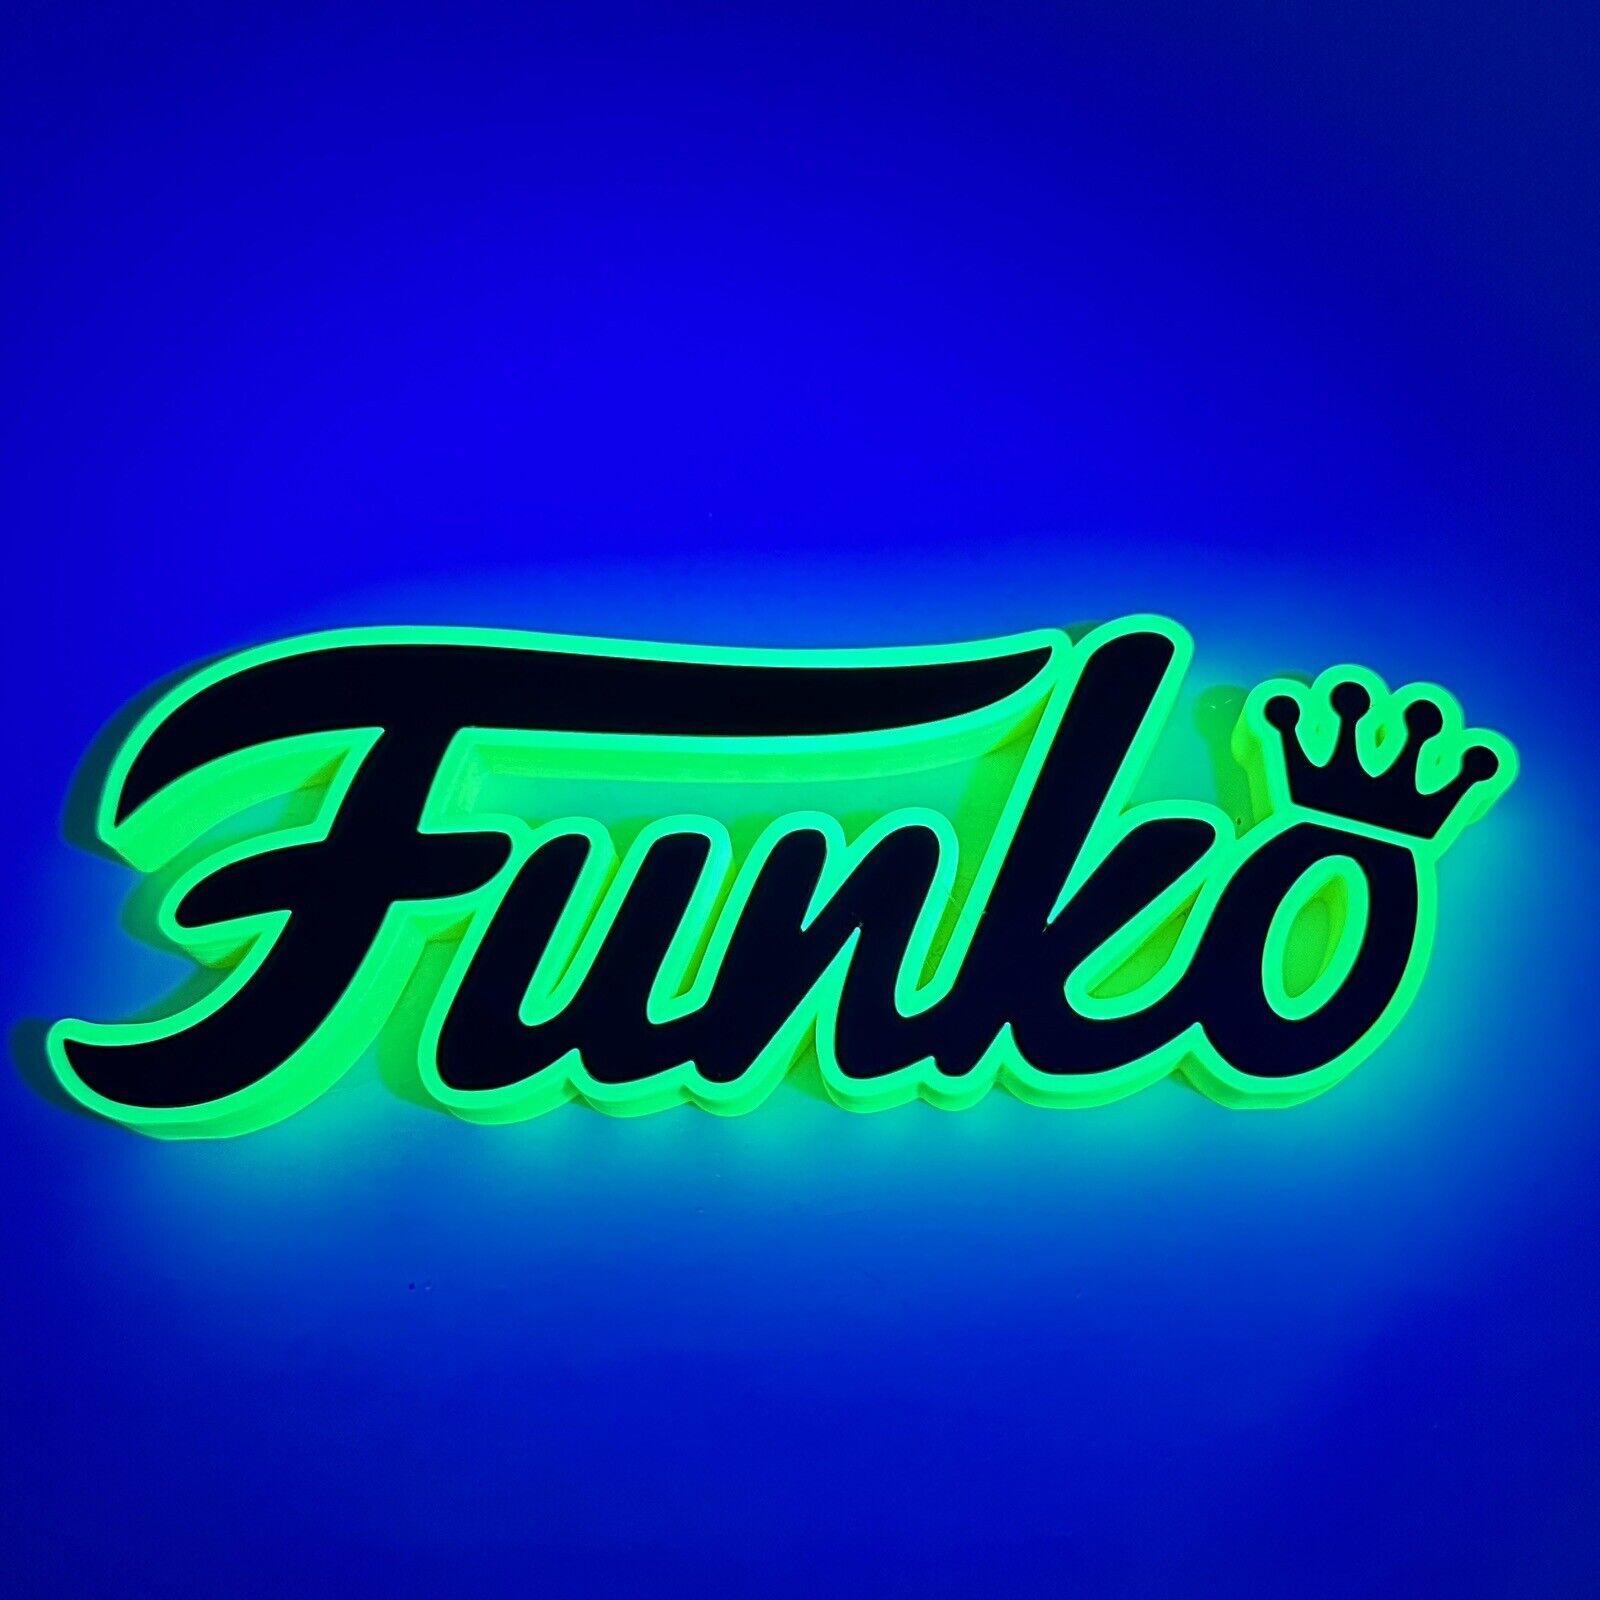 3D Printed BLACK LIGHT - 8.6 INCH - FUNKO Fan Sign (YELLOW) for your Funko Pops